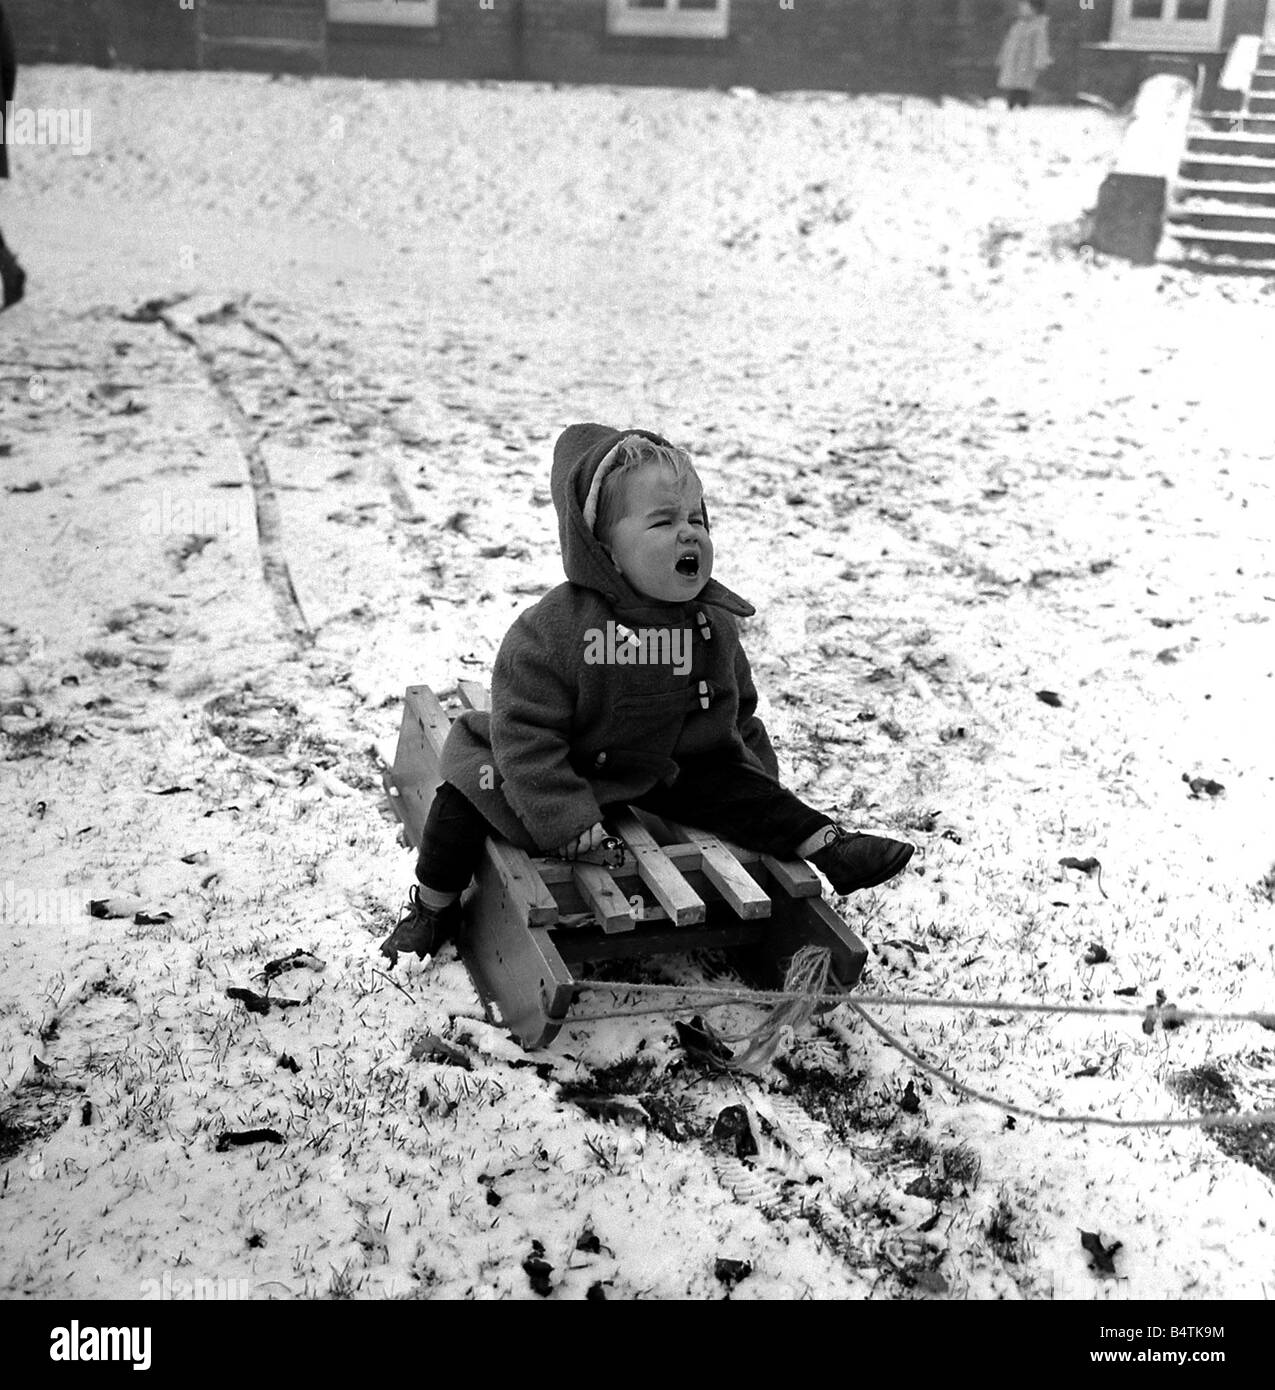 Weather Snow Cold Children Helen Brown 2 years old decides sledging isn t as much fun as she thought and cries out her discomfort in the cold snow Stock Photo